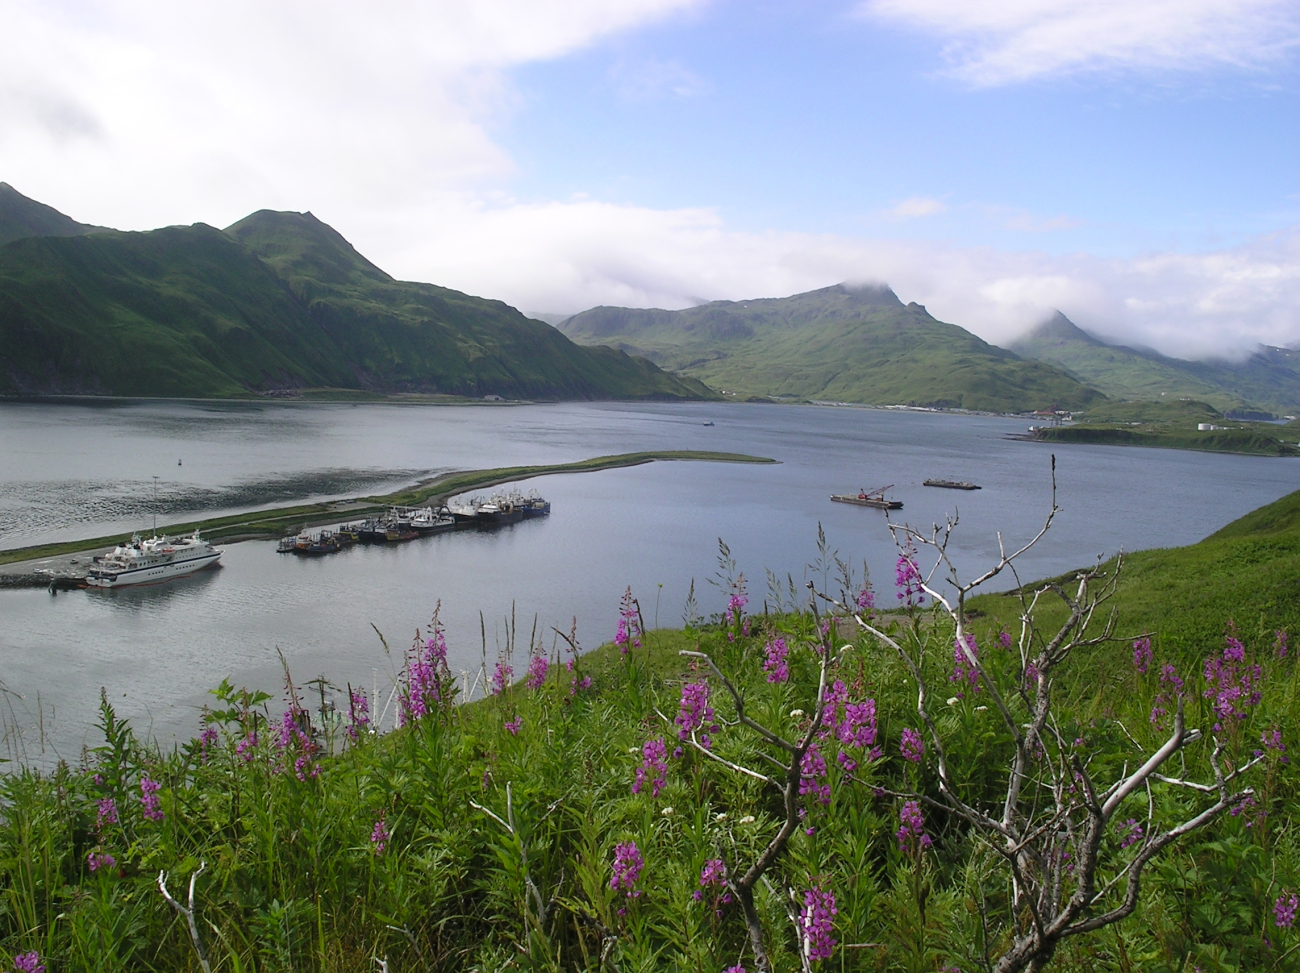 View of part of Dutch Harbor from Mt